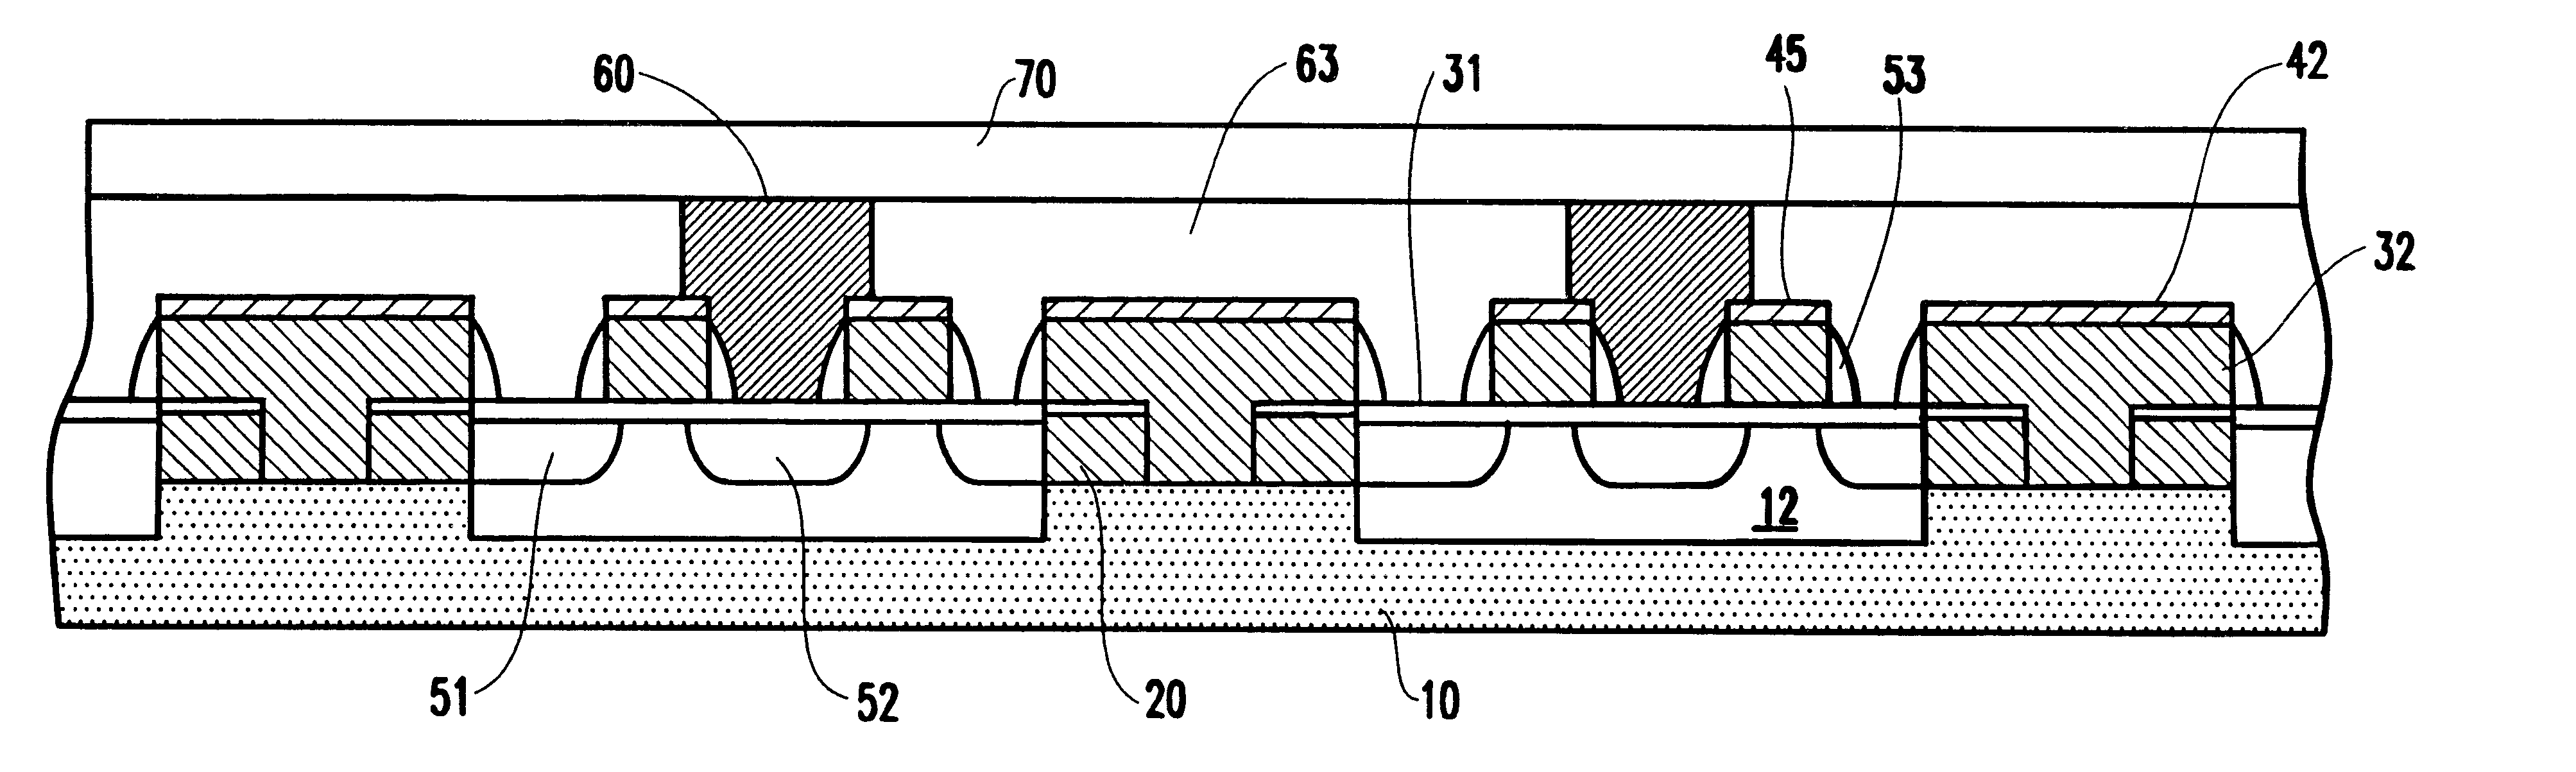 High dielectric constant materials forming components of DRAM storage cells